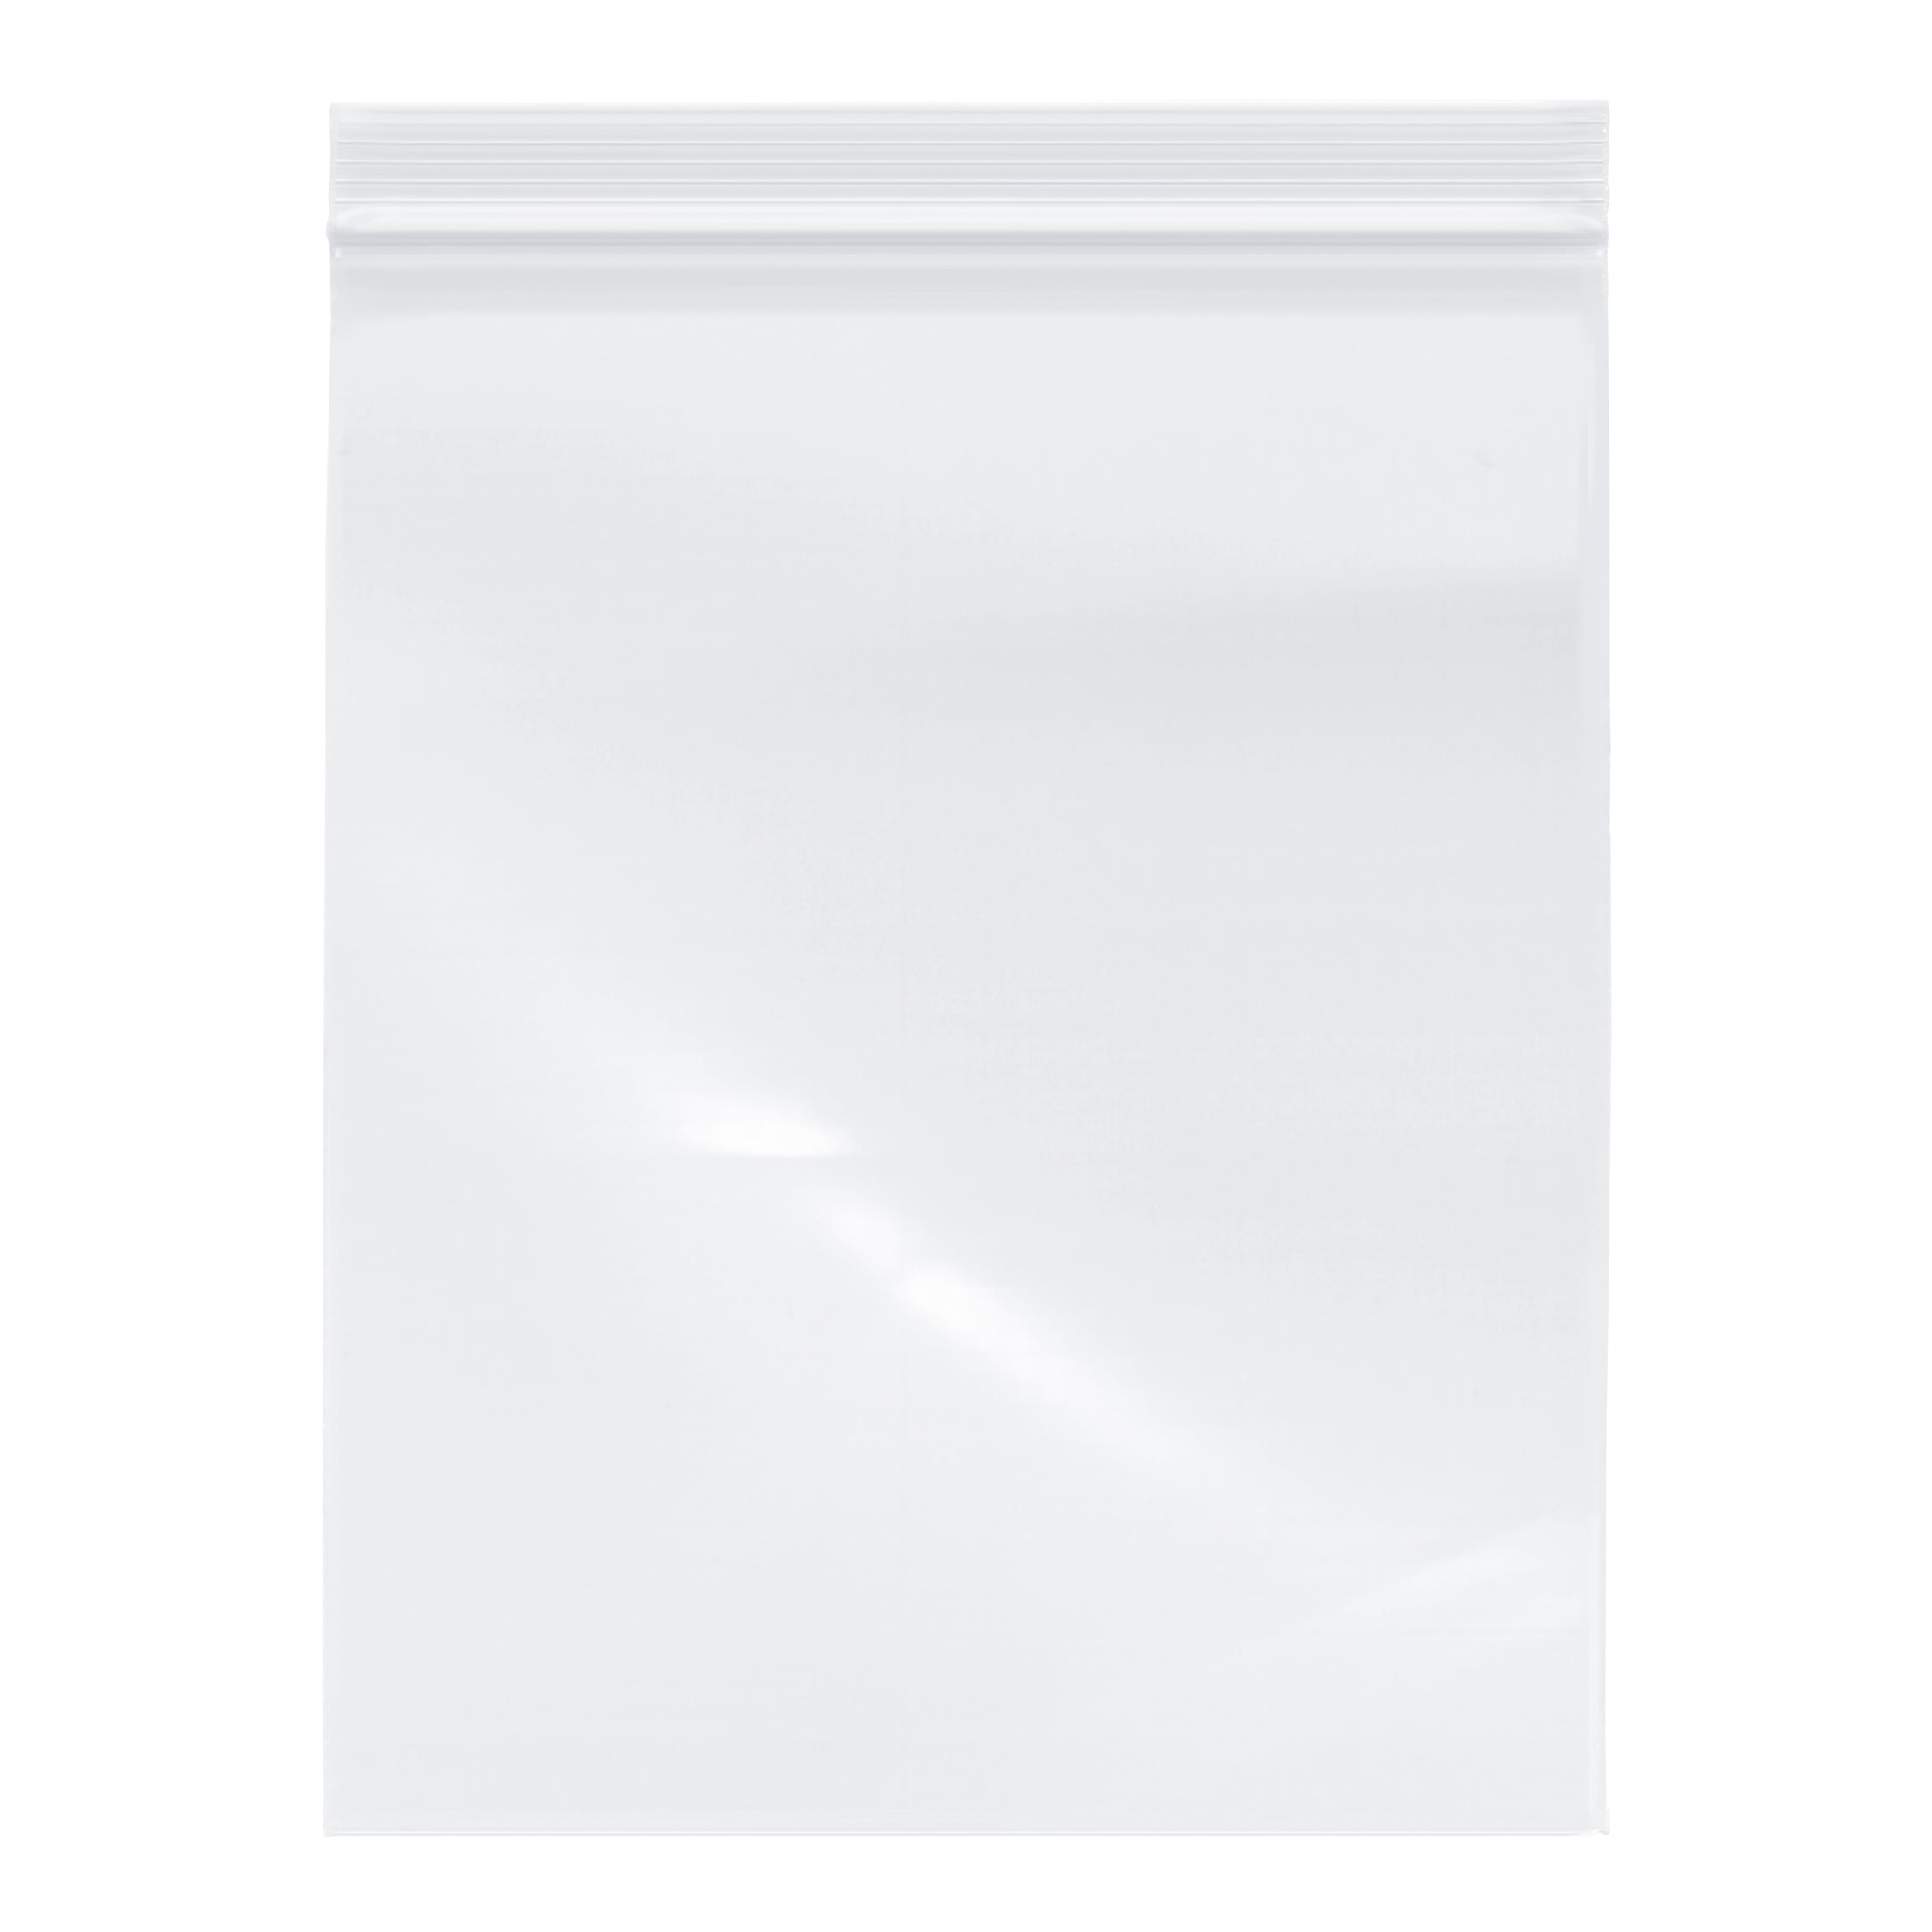 100x/bag Small Clear Plastic Bags Reclosable Resealable Zipper 8 Sizes 